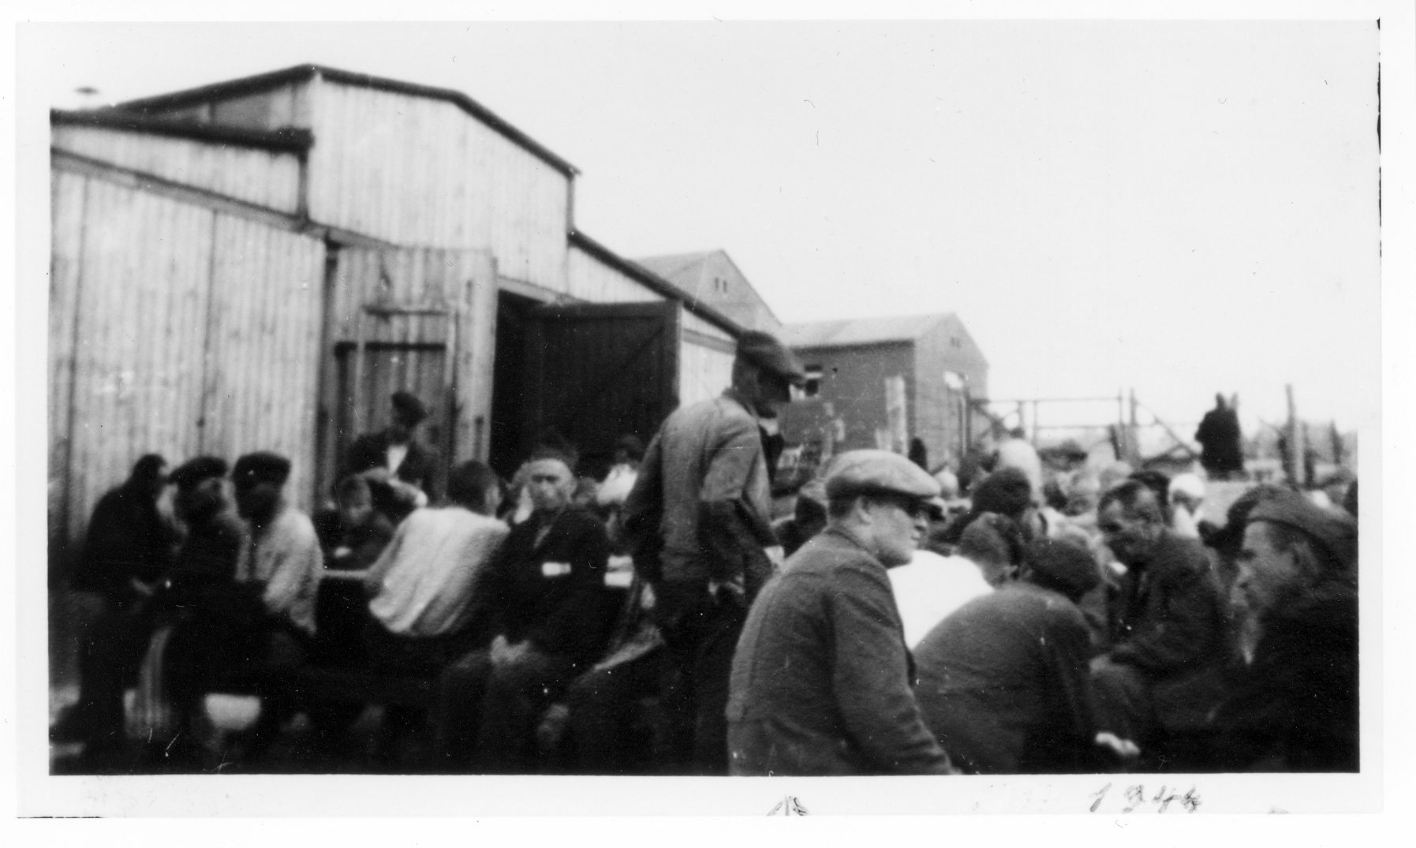 Prisoners of the Small Camp are sitting and standing in front of a horse stable barrack, behind it two larger stone buildings. The picture shows a bustle of activity. 